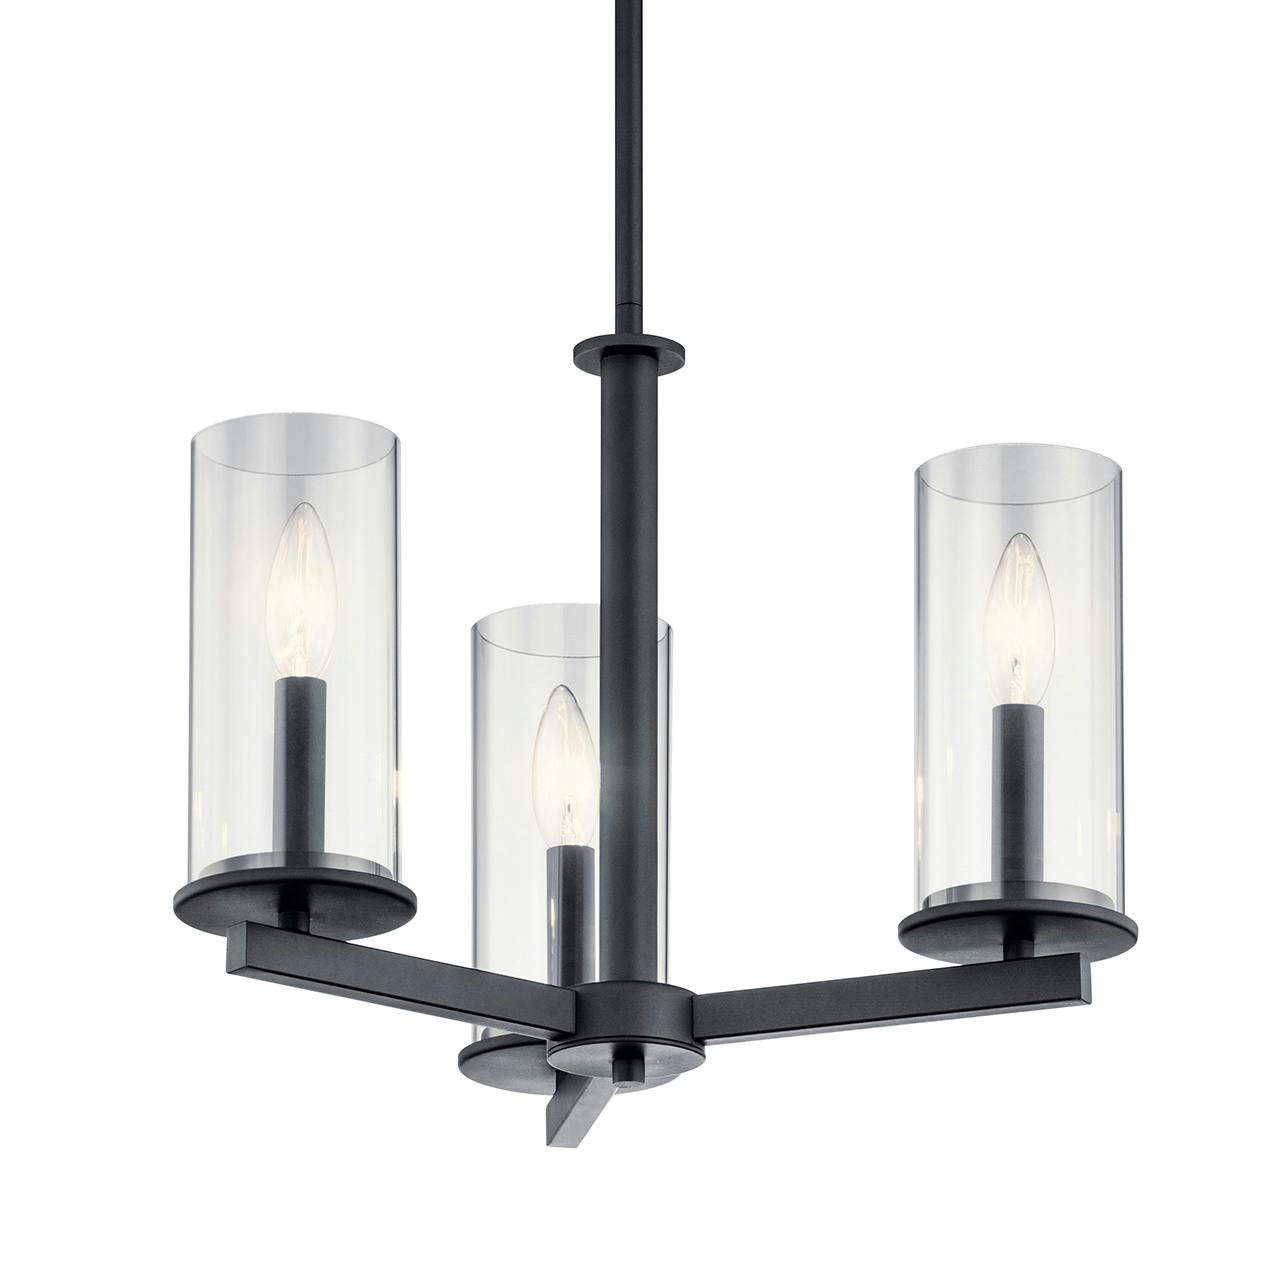 Crosby 3 Light Chandelier Black without the canopy on a white background